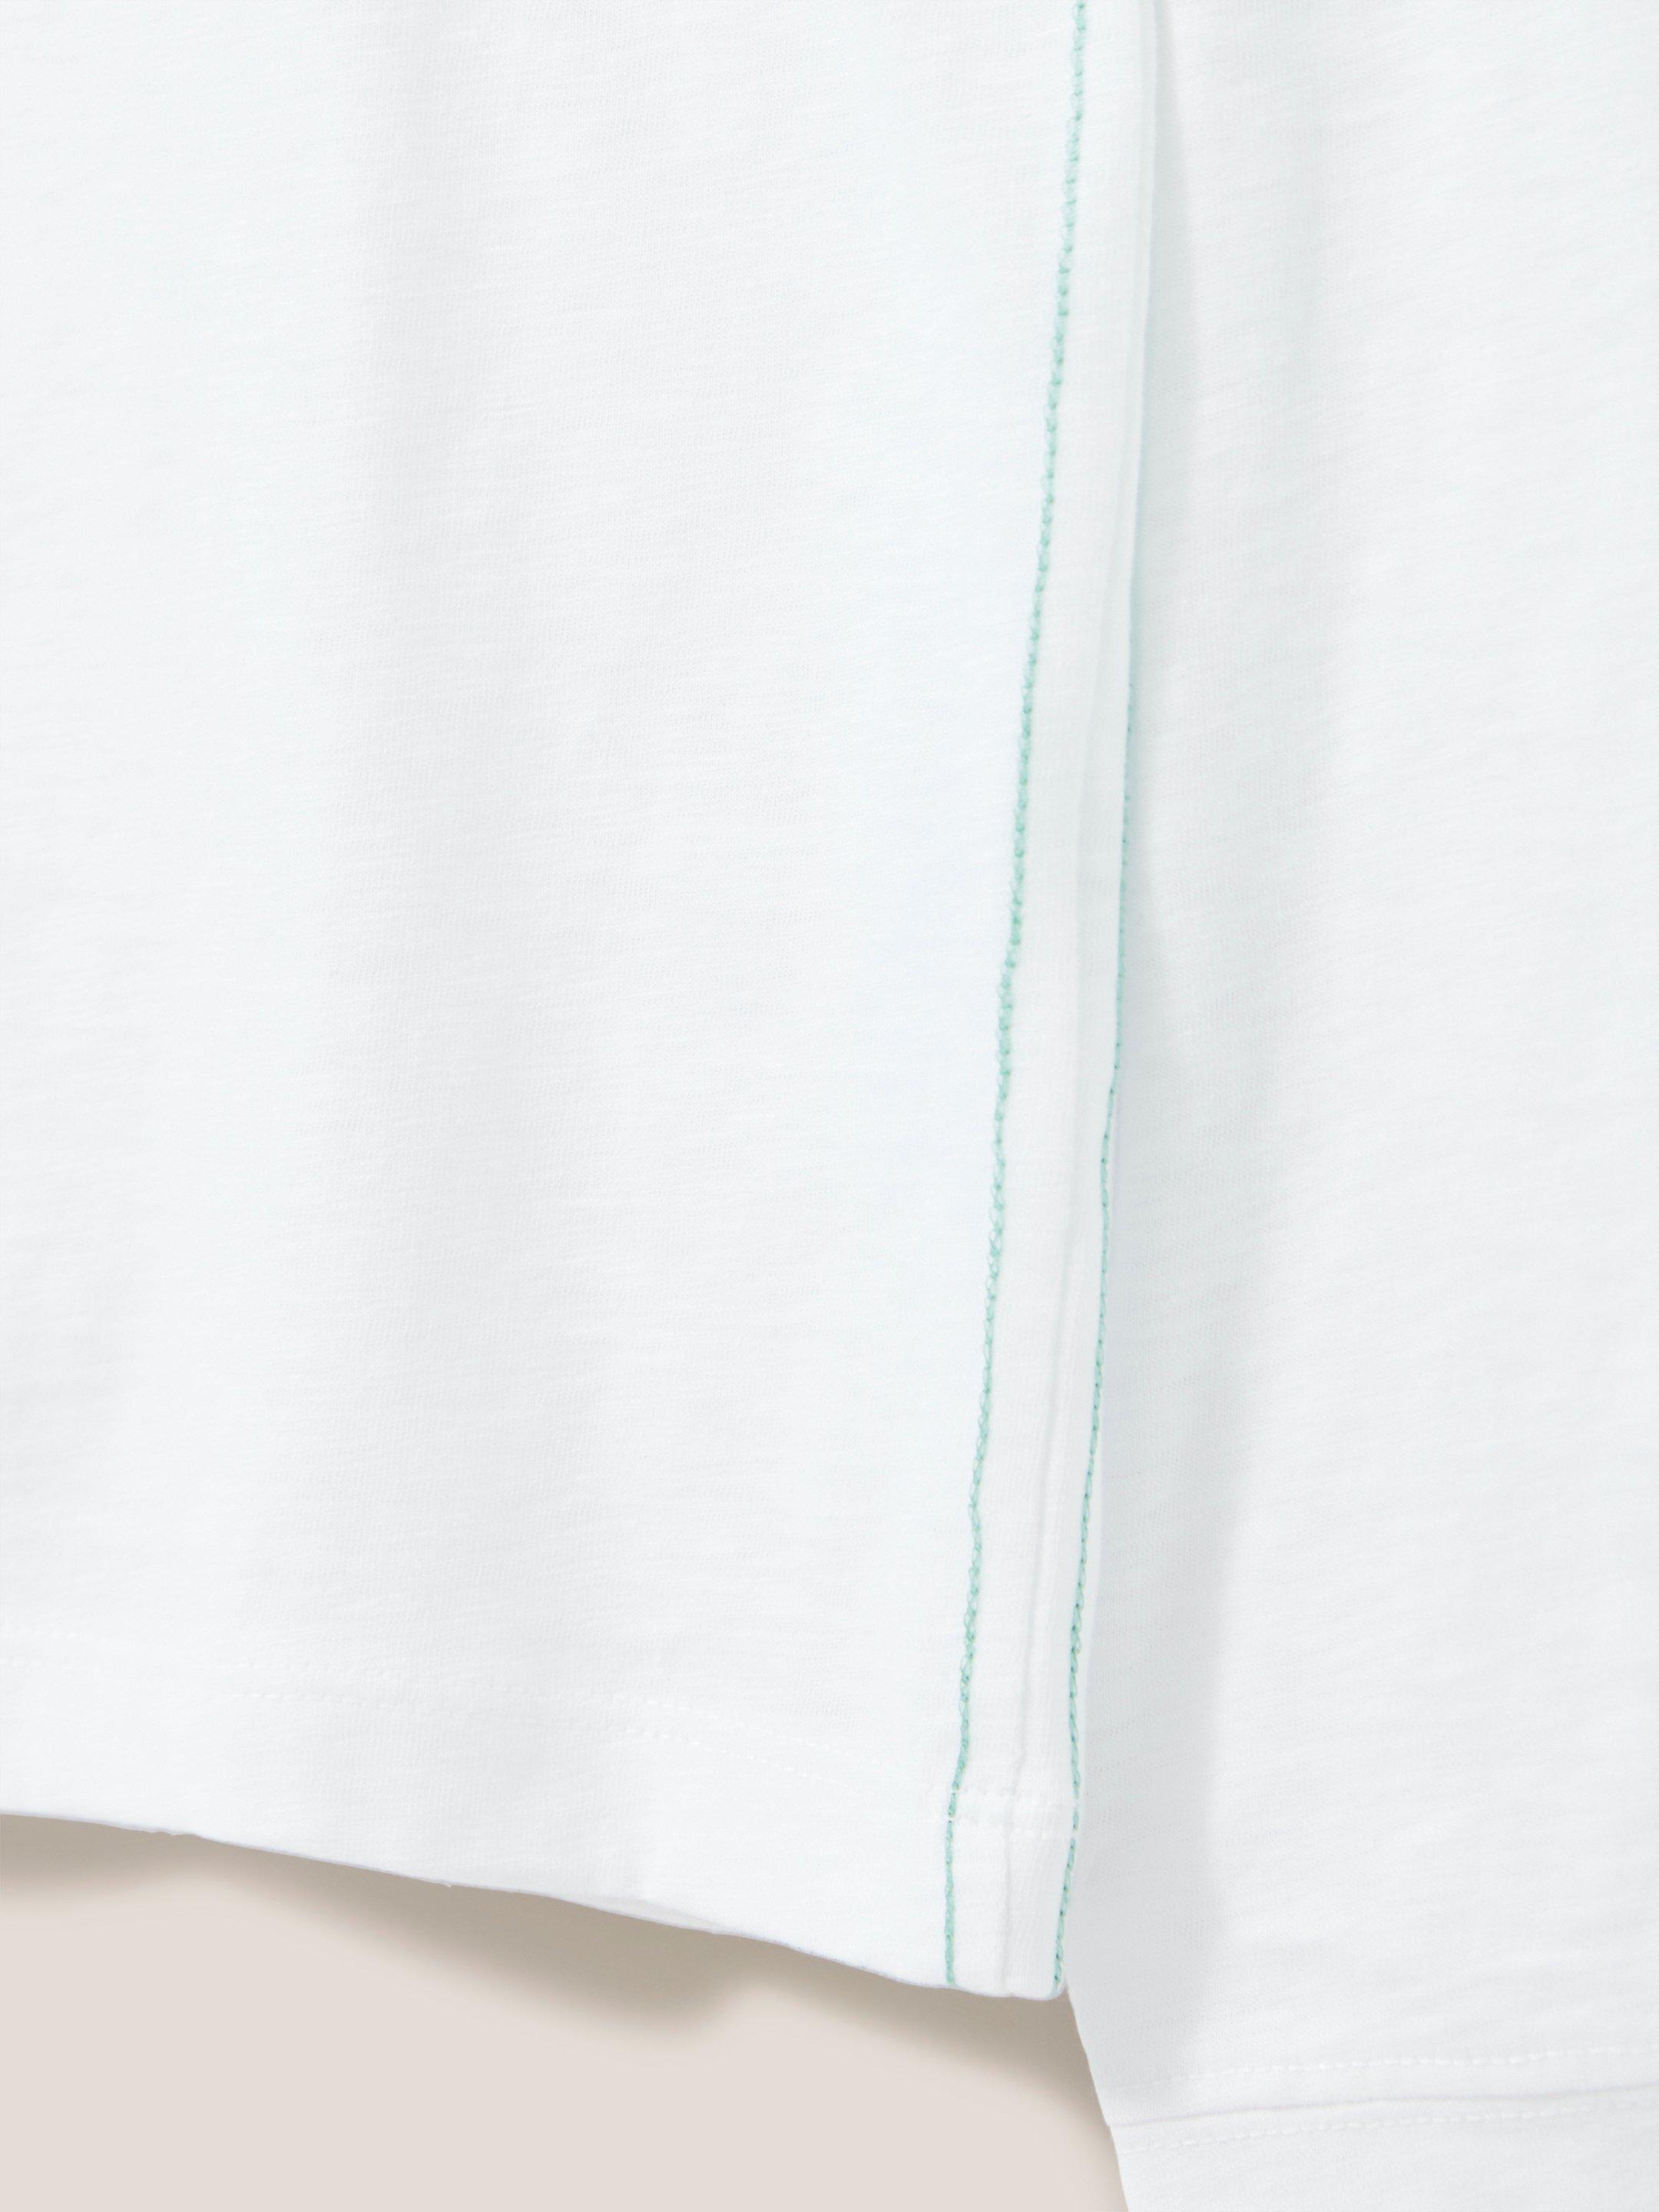 Nelly LS Tee in BRIL WHITE - FLAT DETAIL